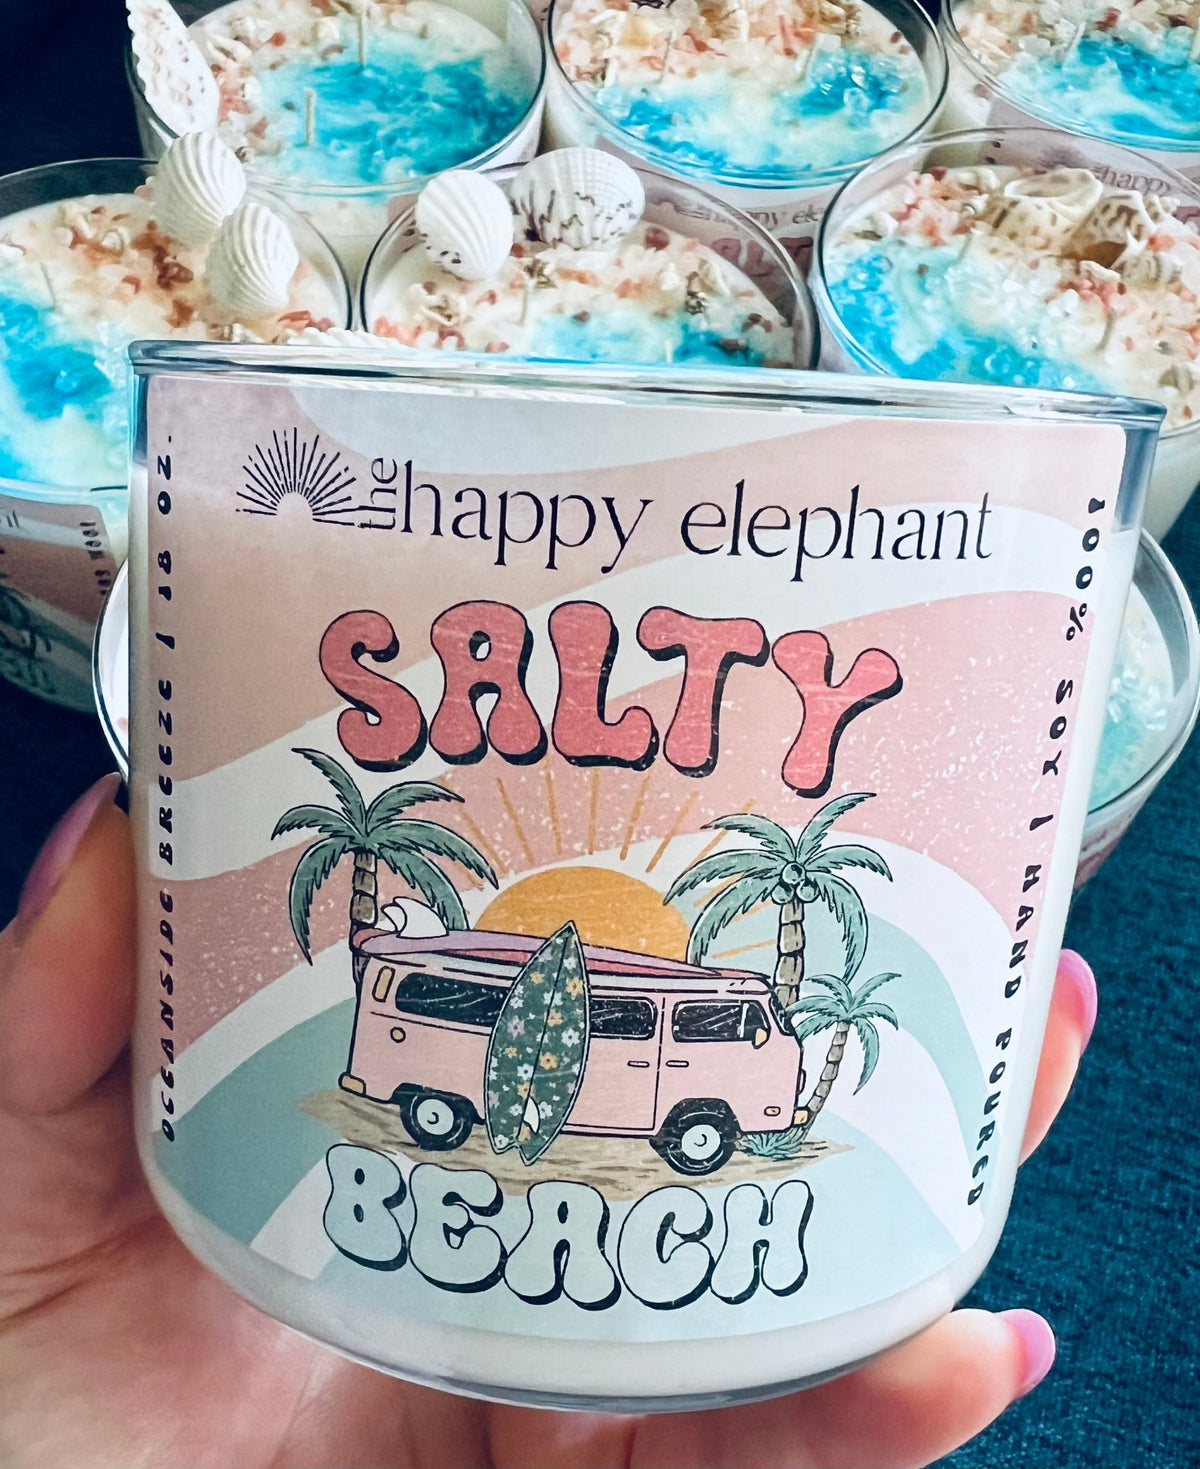 Salty Beach Soy Candle (Oceanside Breeze) - The Happy Elephant